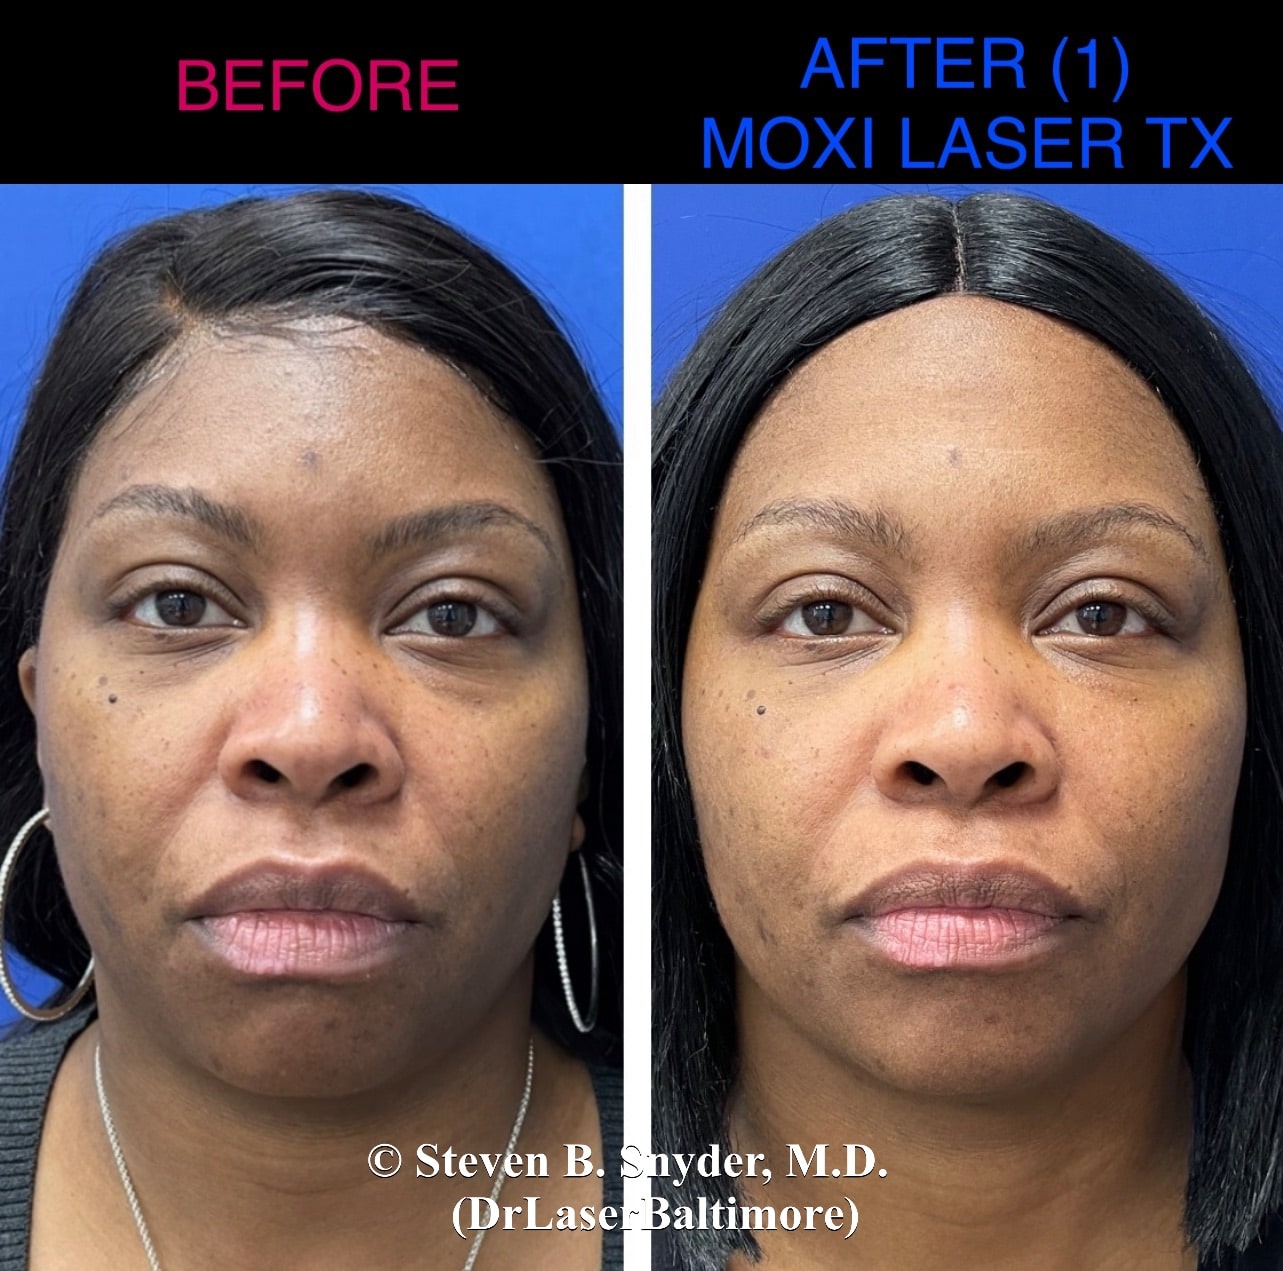 Before and after photos of a woman's face showing uneven skin tone before and brighter, more even skin after Moxi Laser treatment in Baltimore.